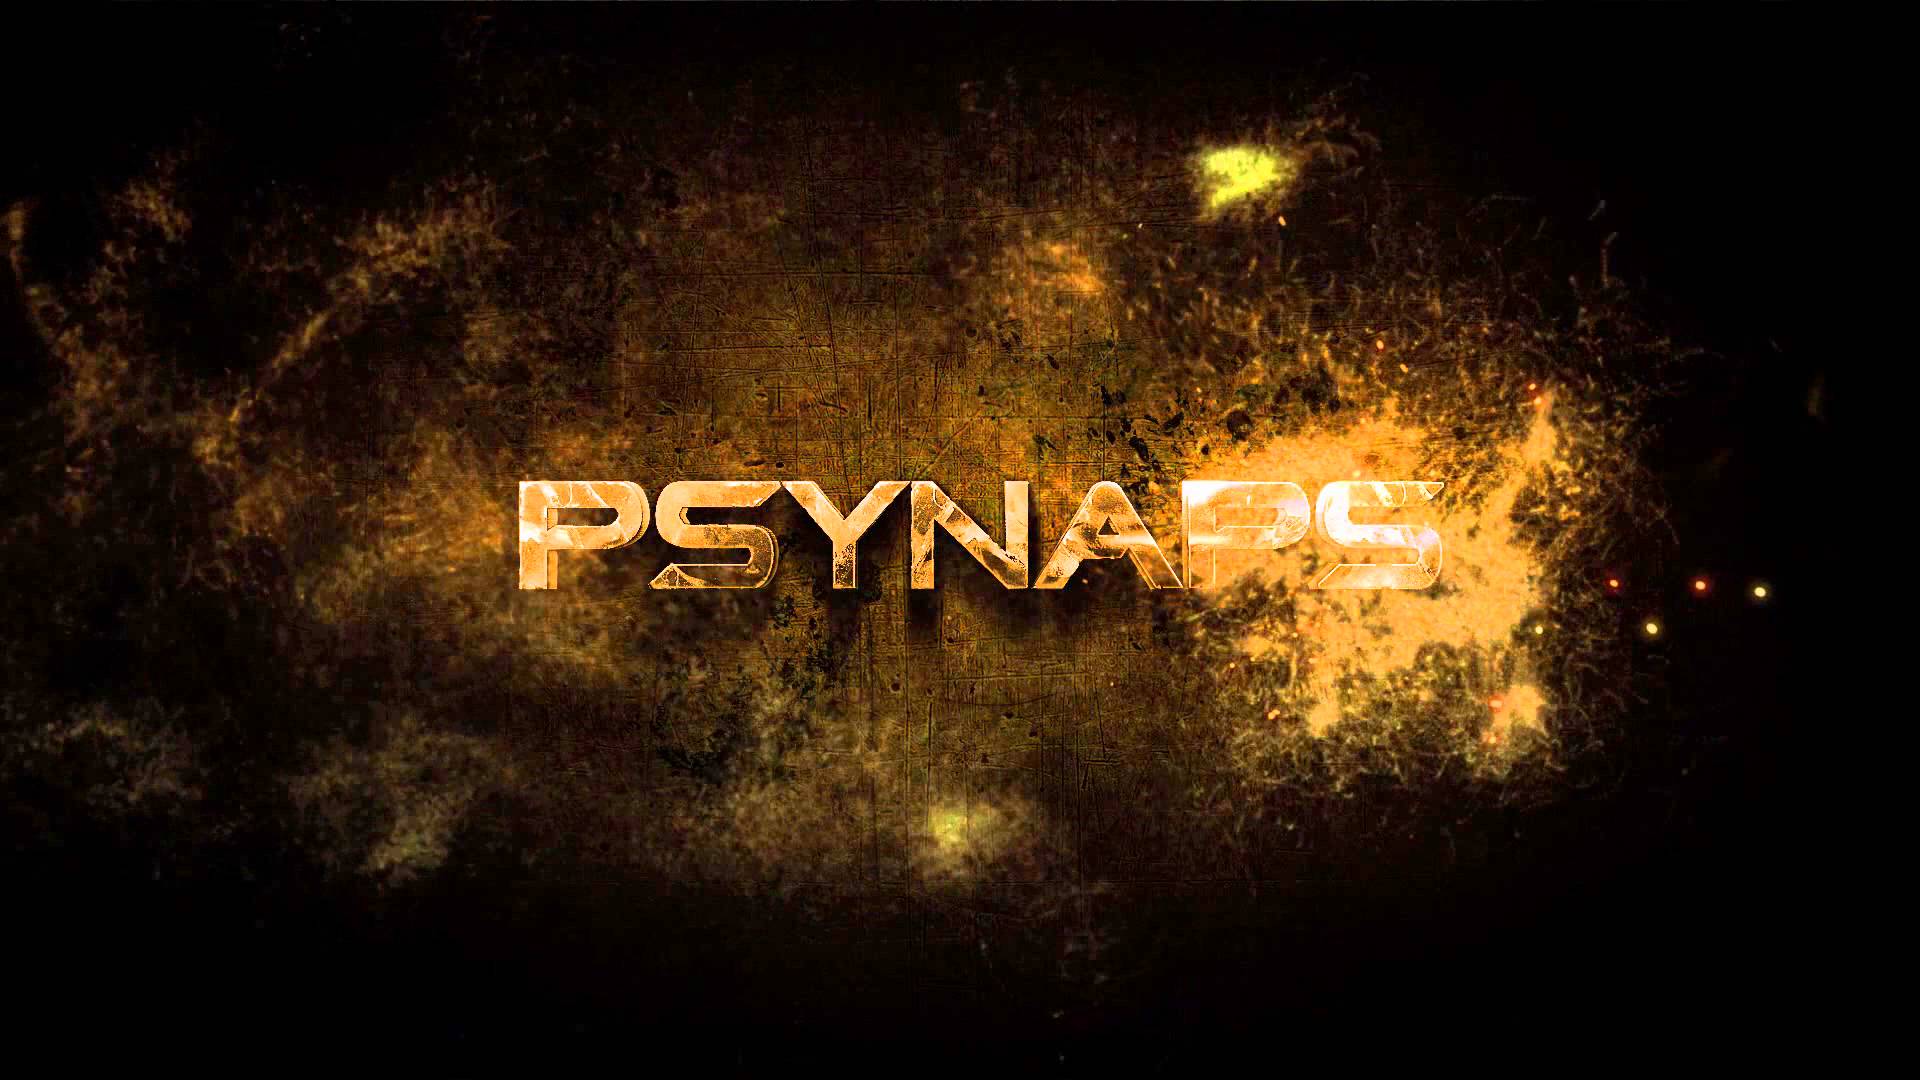 Epic Particle Intro by Psynaps